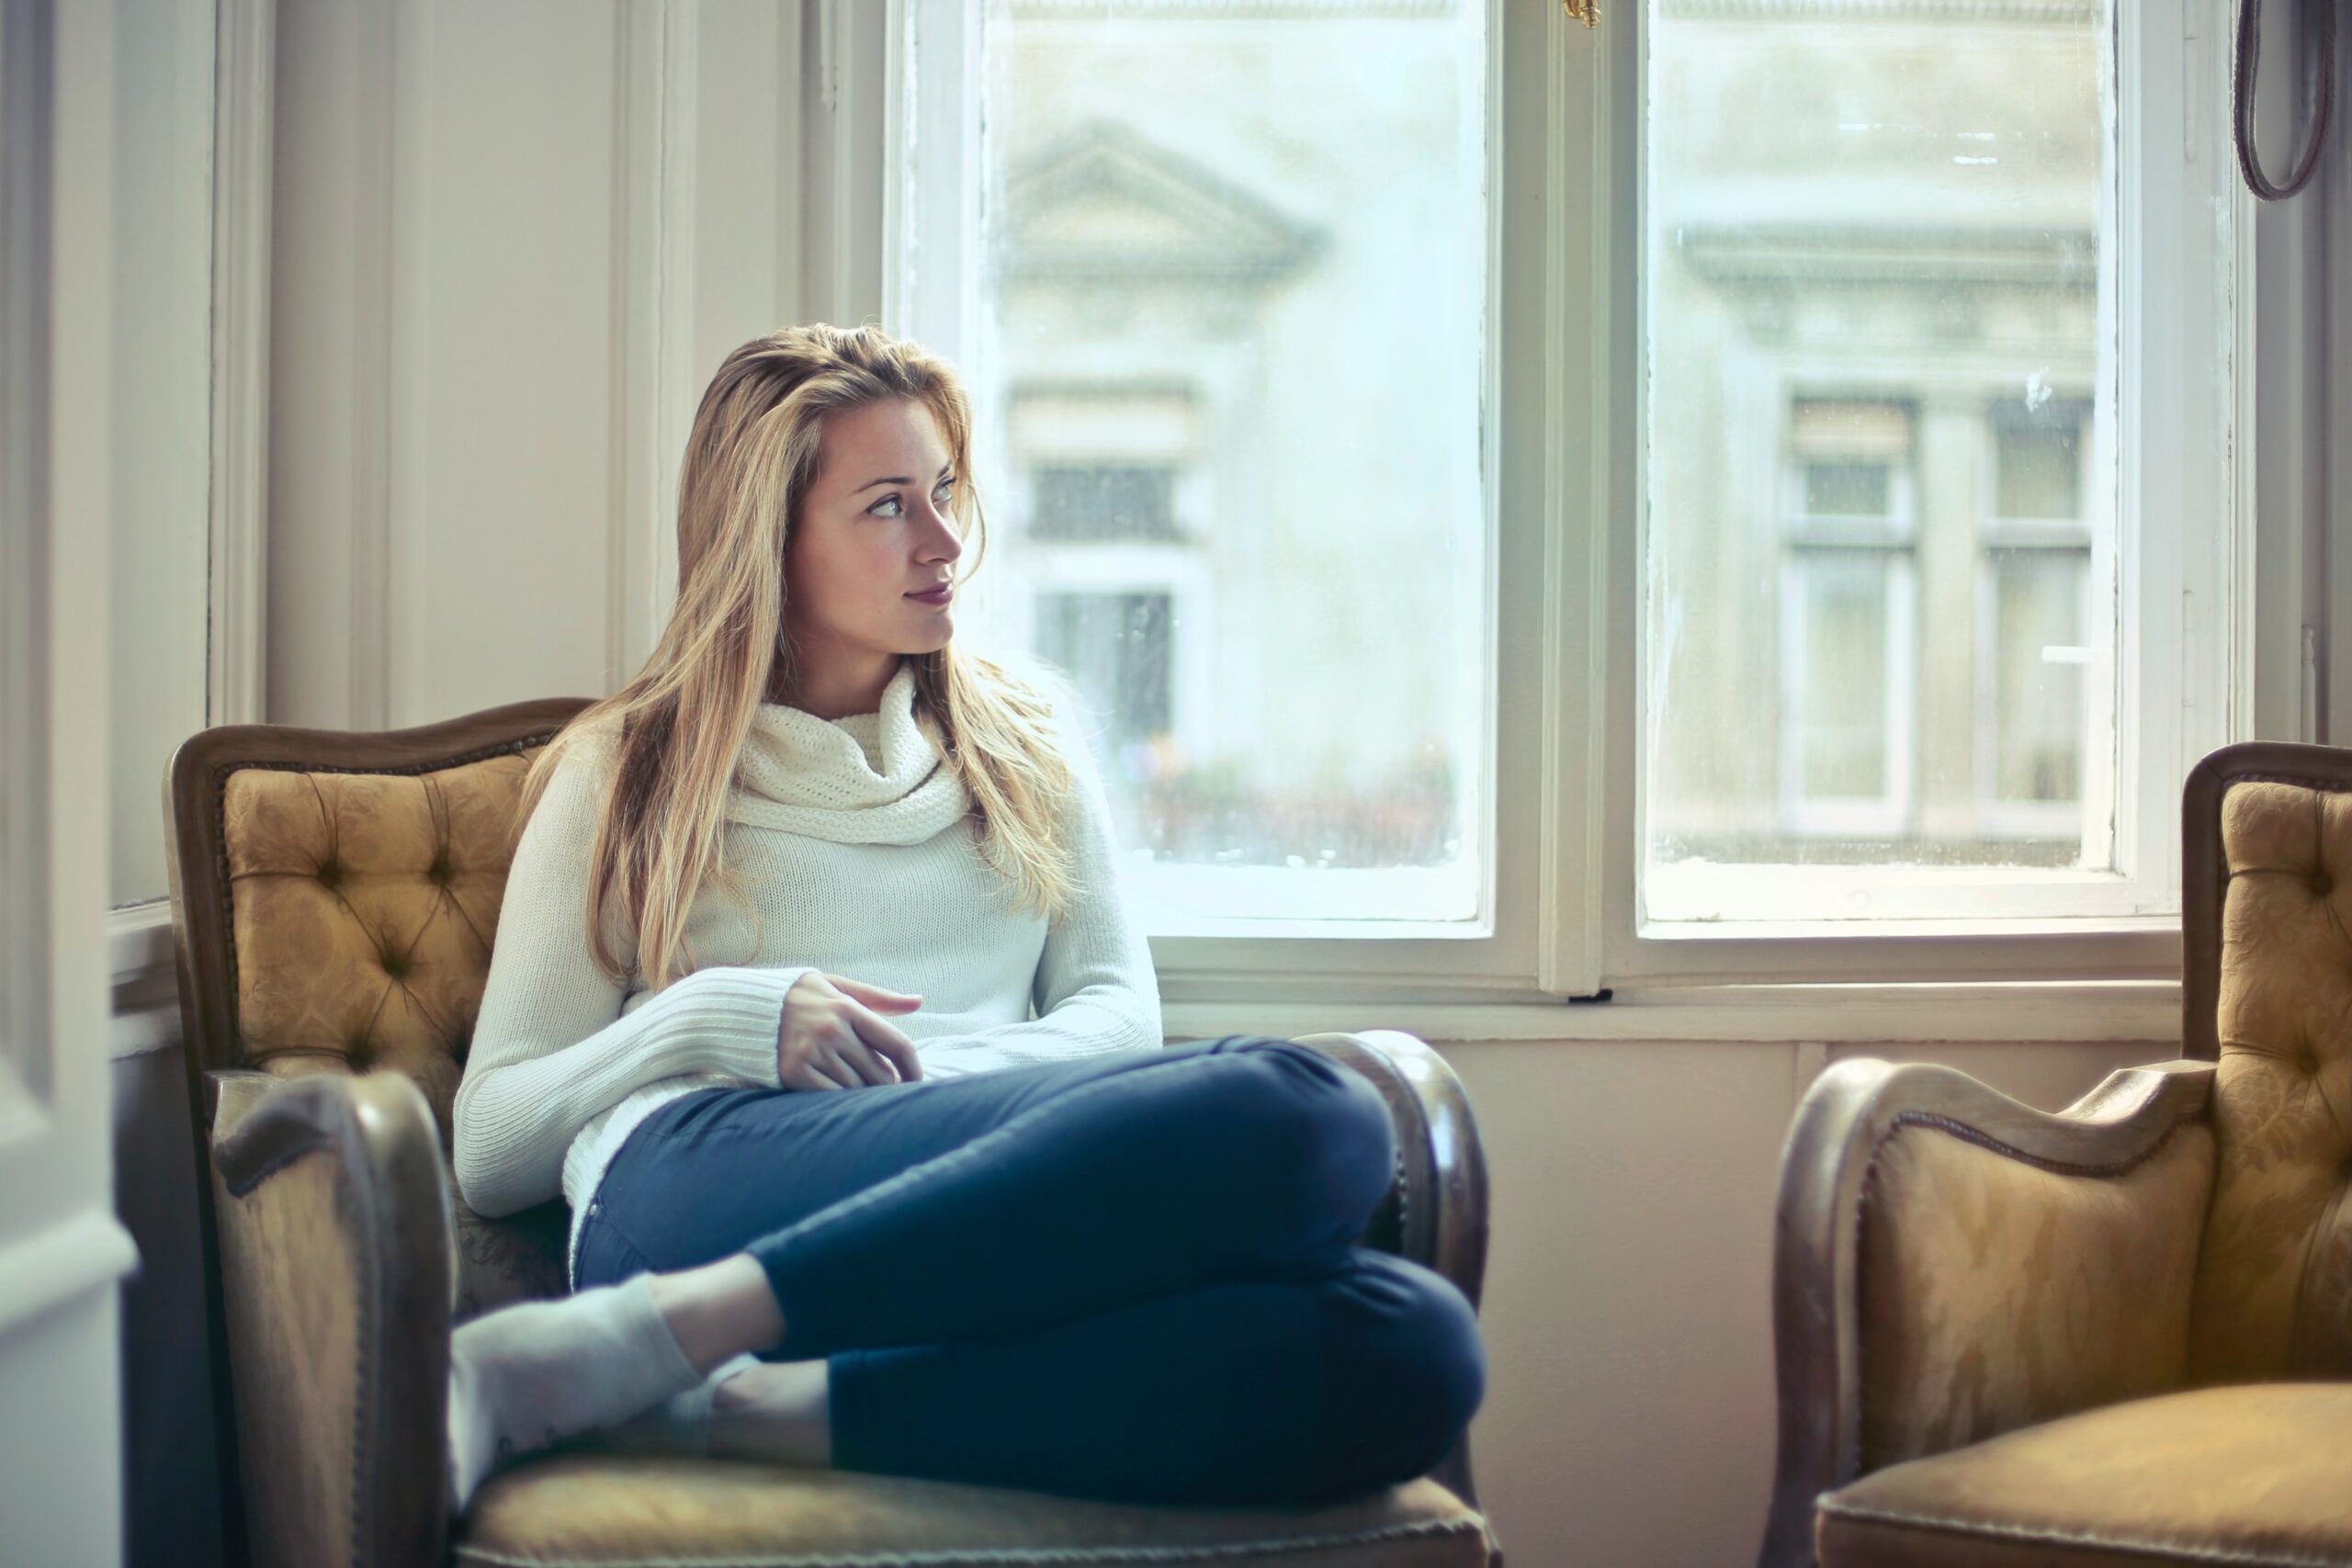 Single Woman Sitting in House - Safety Tips for Women Living Alone